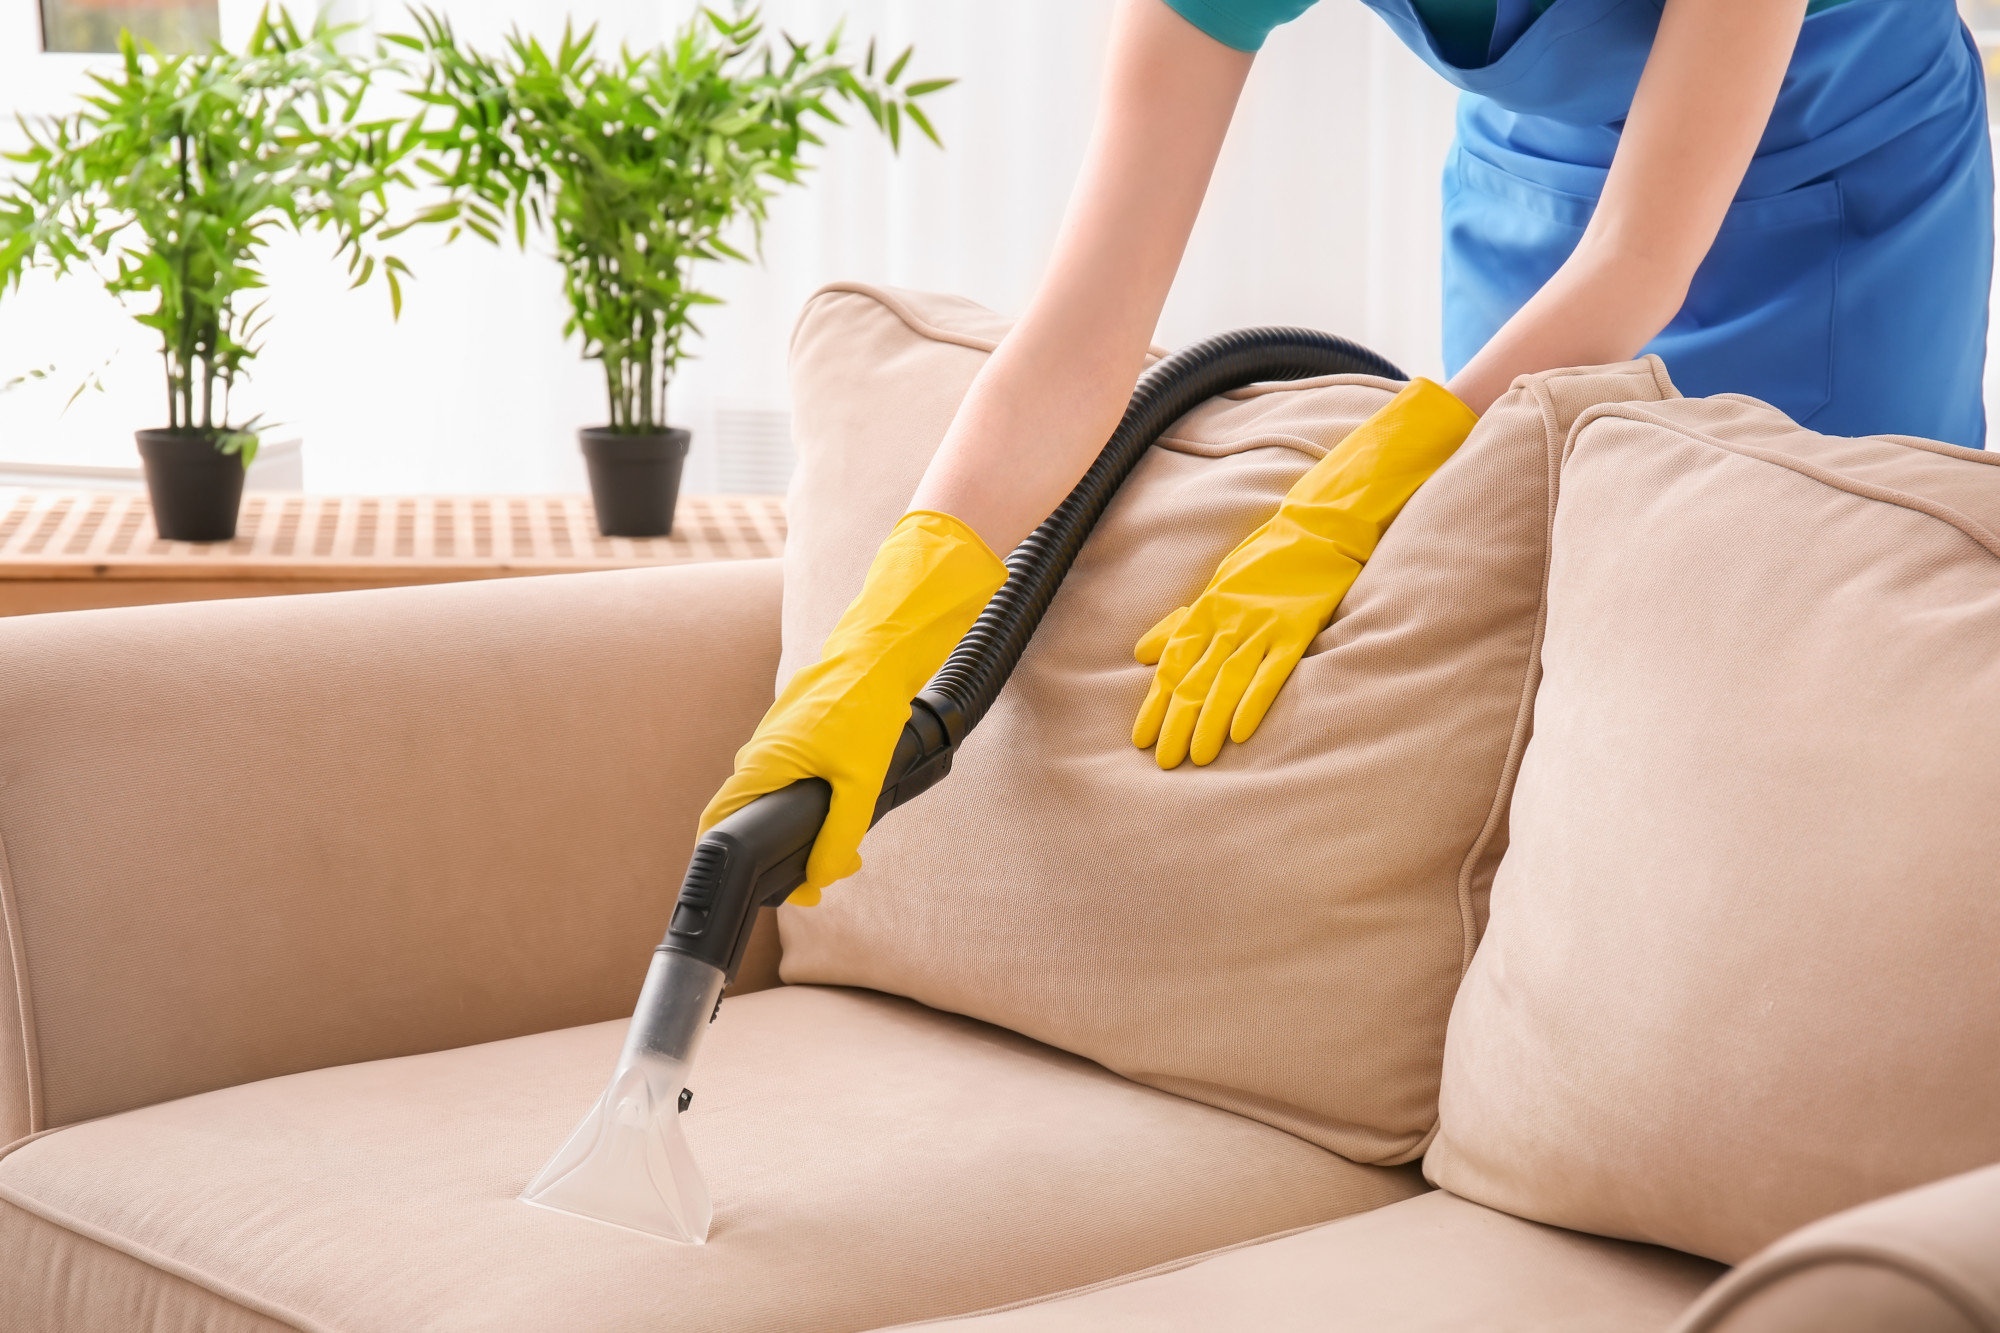 HOW TO CLEAN COUCH UPHOLSTERY: